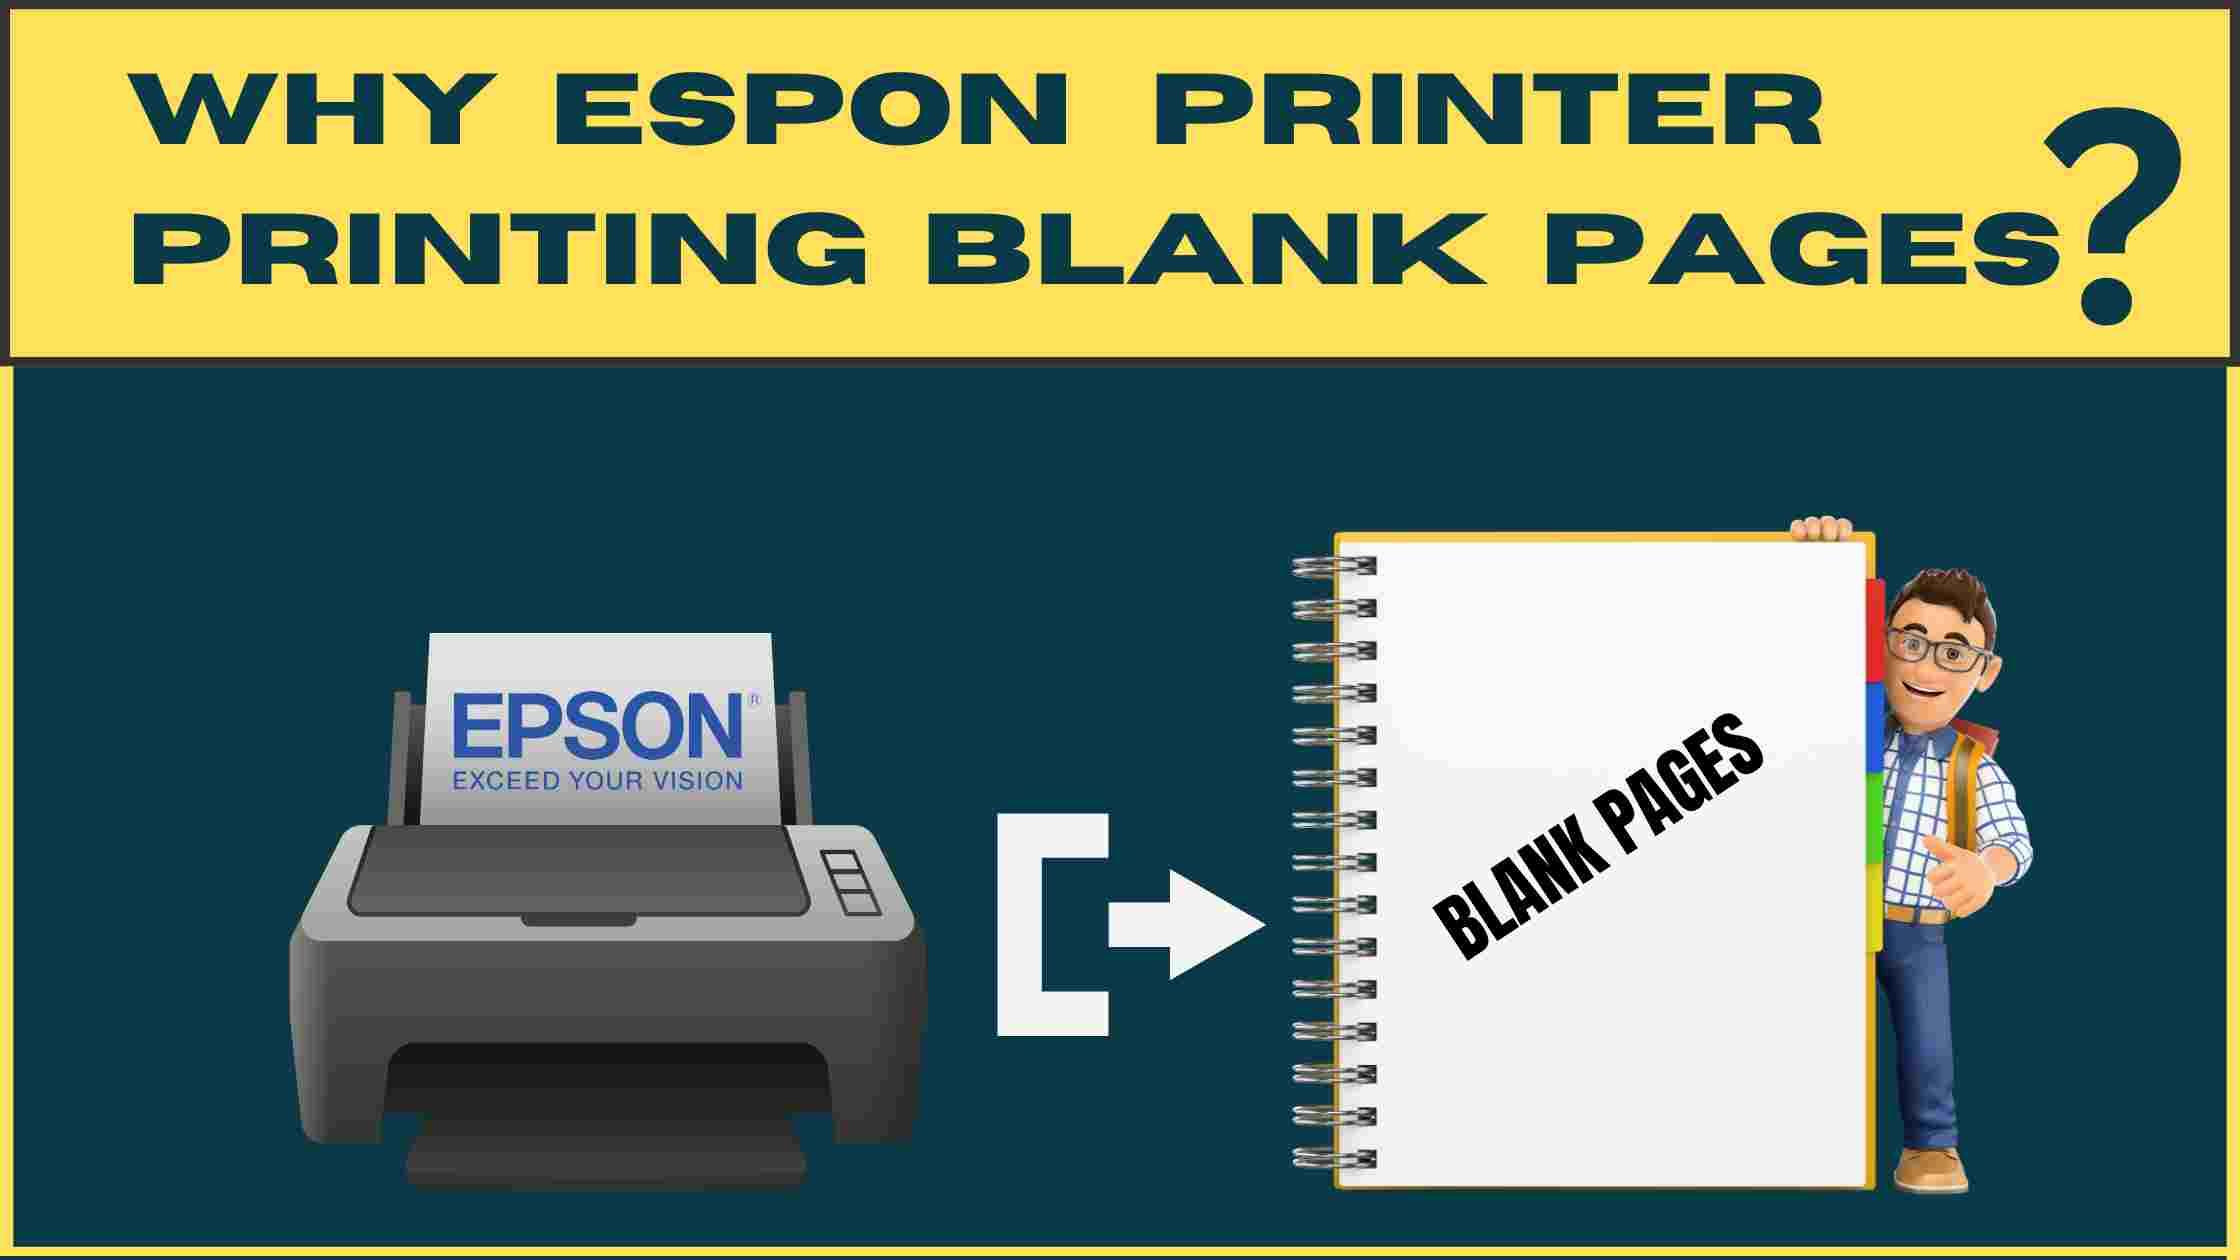 WHY ESPON PRINTER PRINTING BLANK PAGES